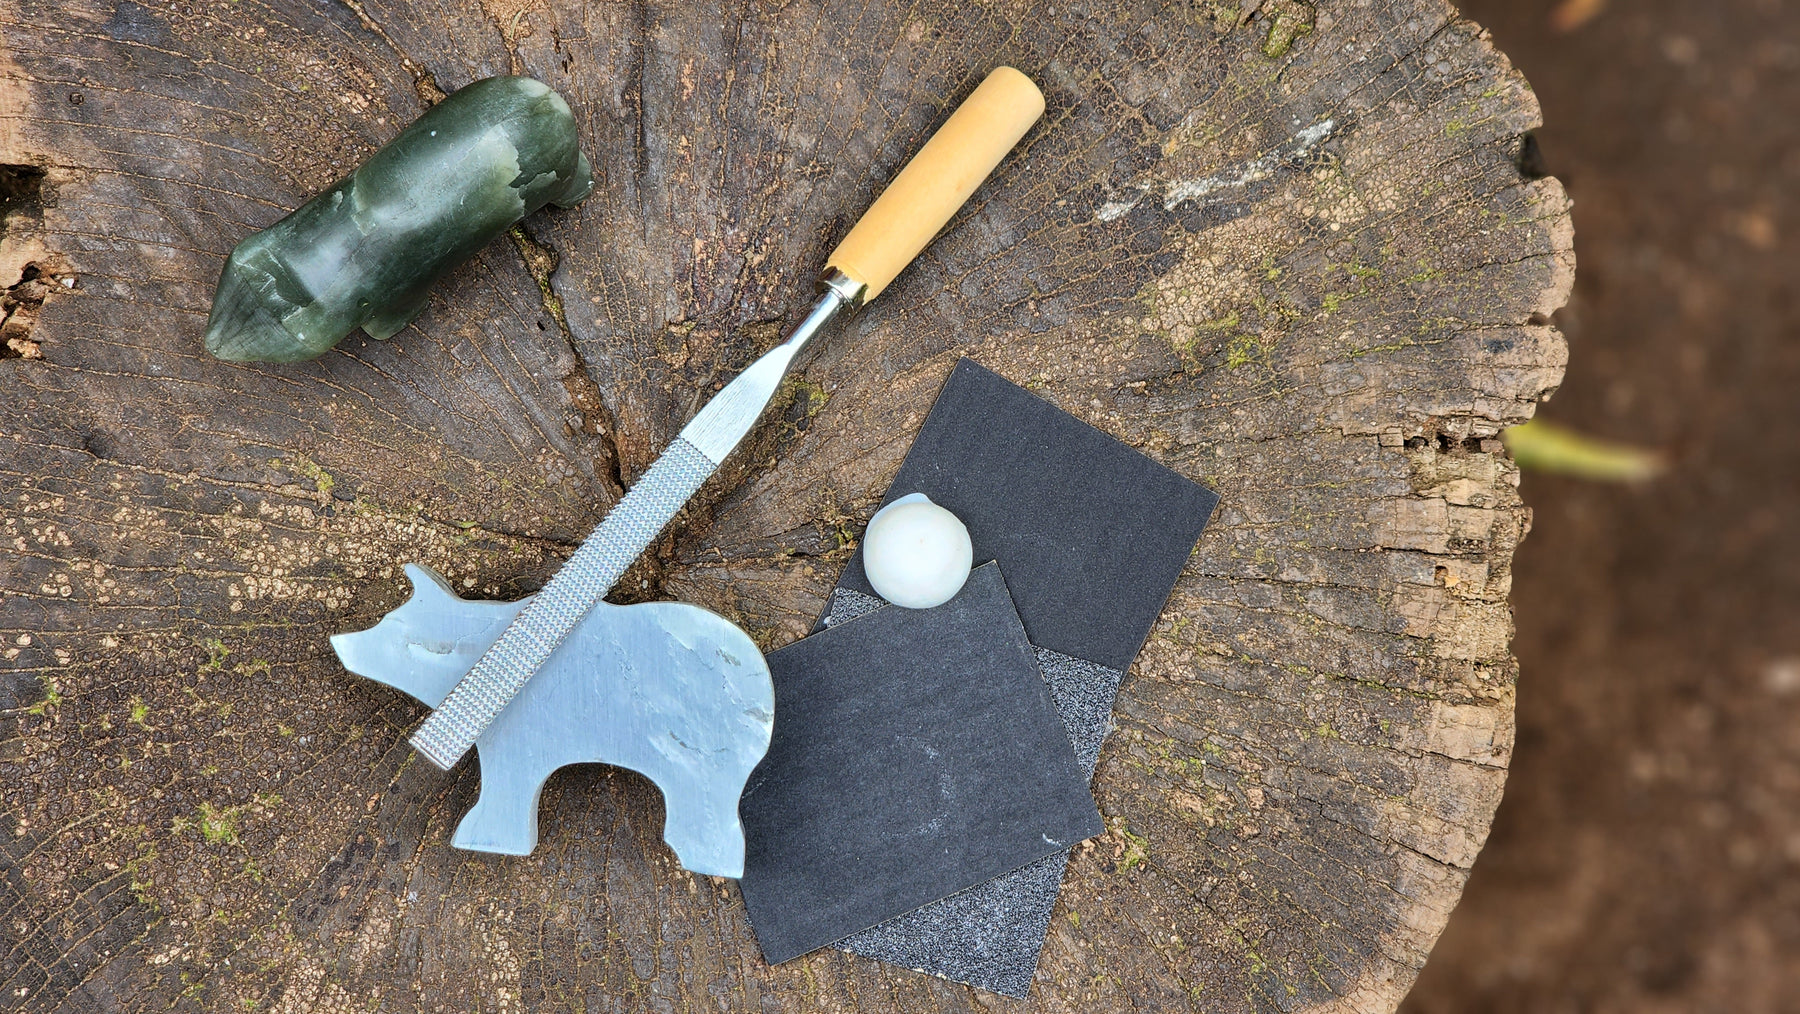 Soapstone Carving Kit is becoming a popular toy for children and adults alike